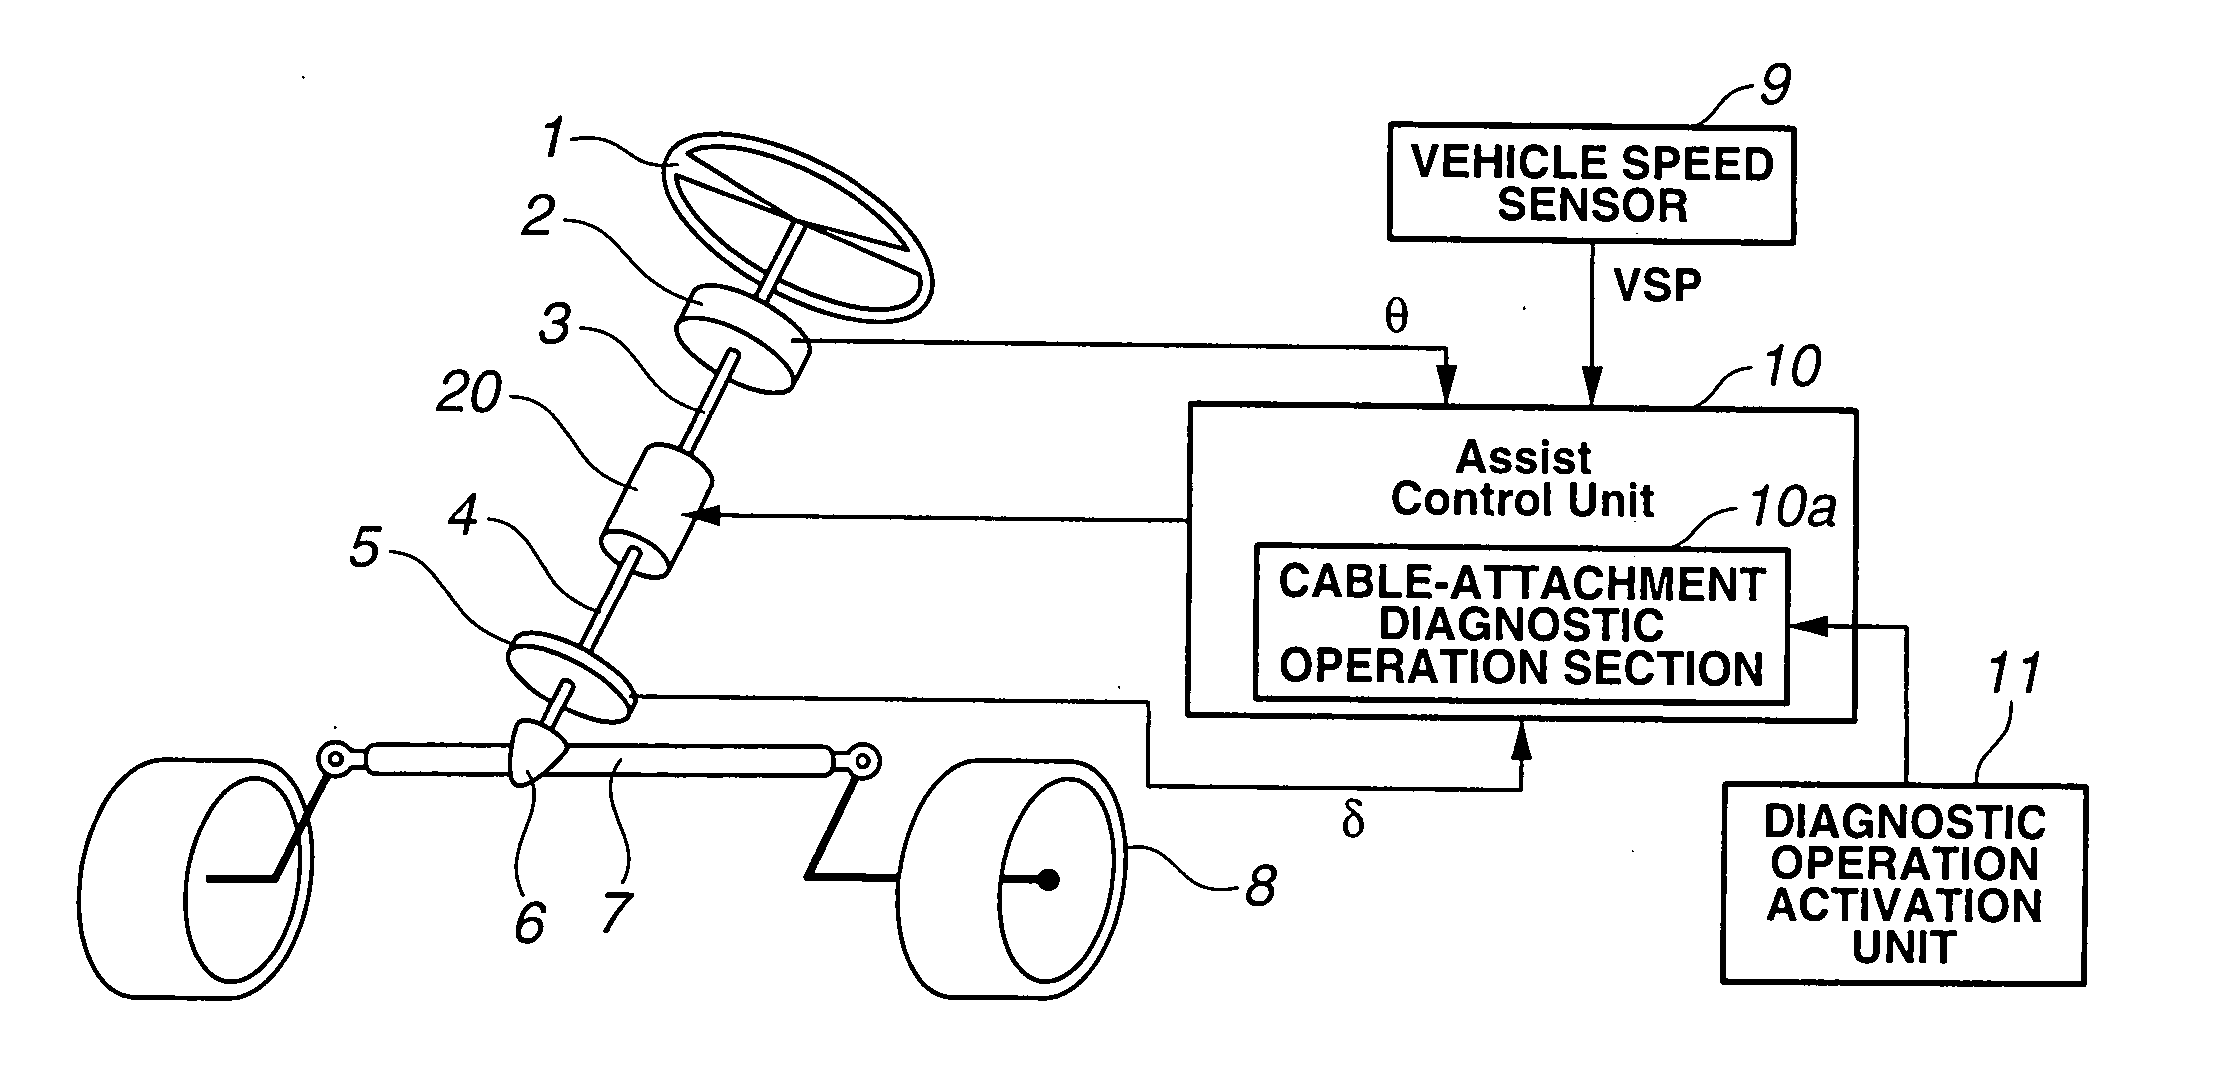 Steering control apparatus and method for diagnosing cable attachment